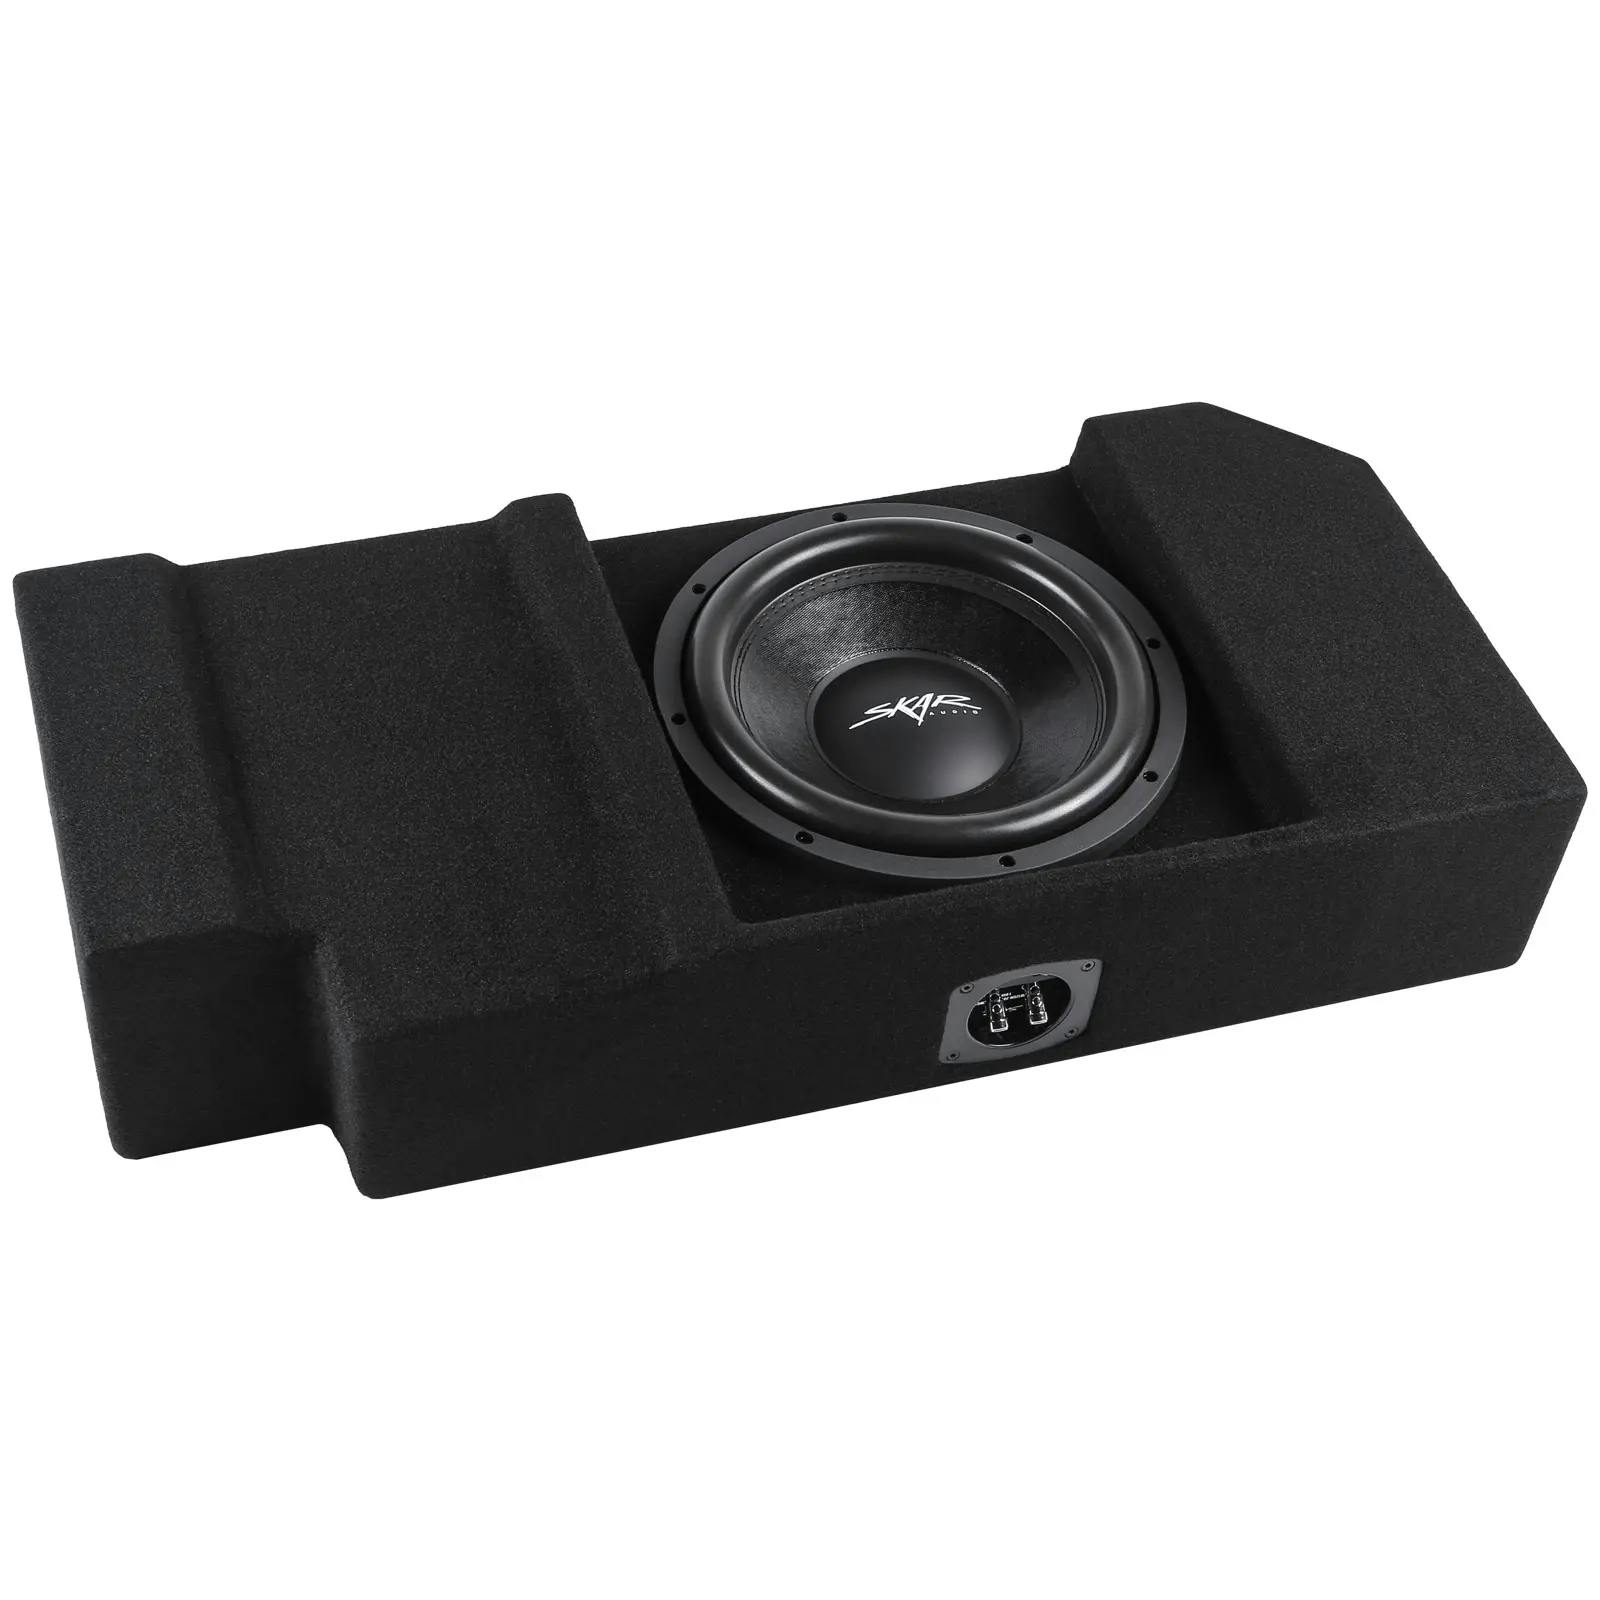 Featured Product Photo for Single 12" 800W Max Power Loaded Ported Subwoofer Enclosure Compatible with 2019-2024 Chevy Silverado & GMC Sierra Crew Cab Trucks